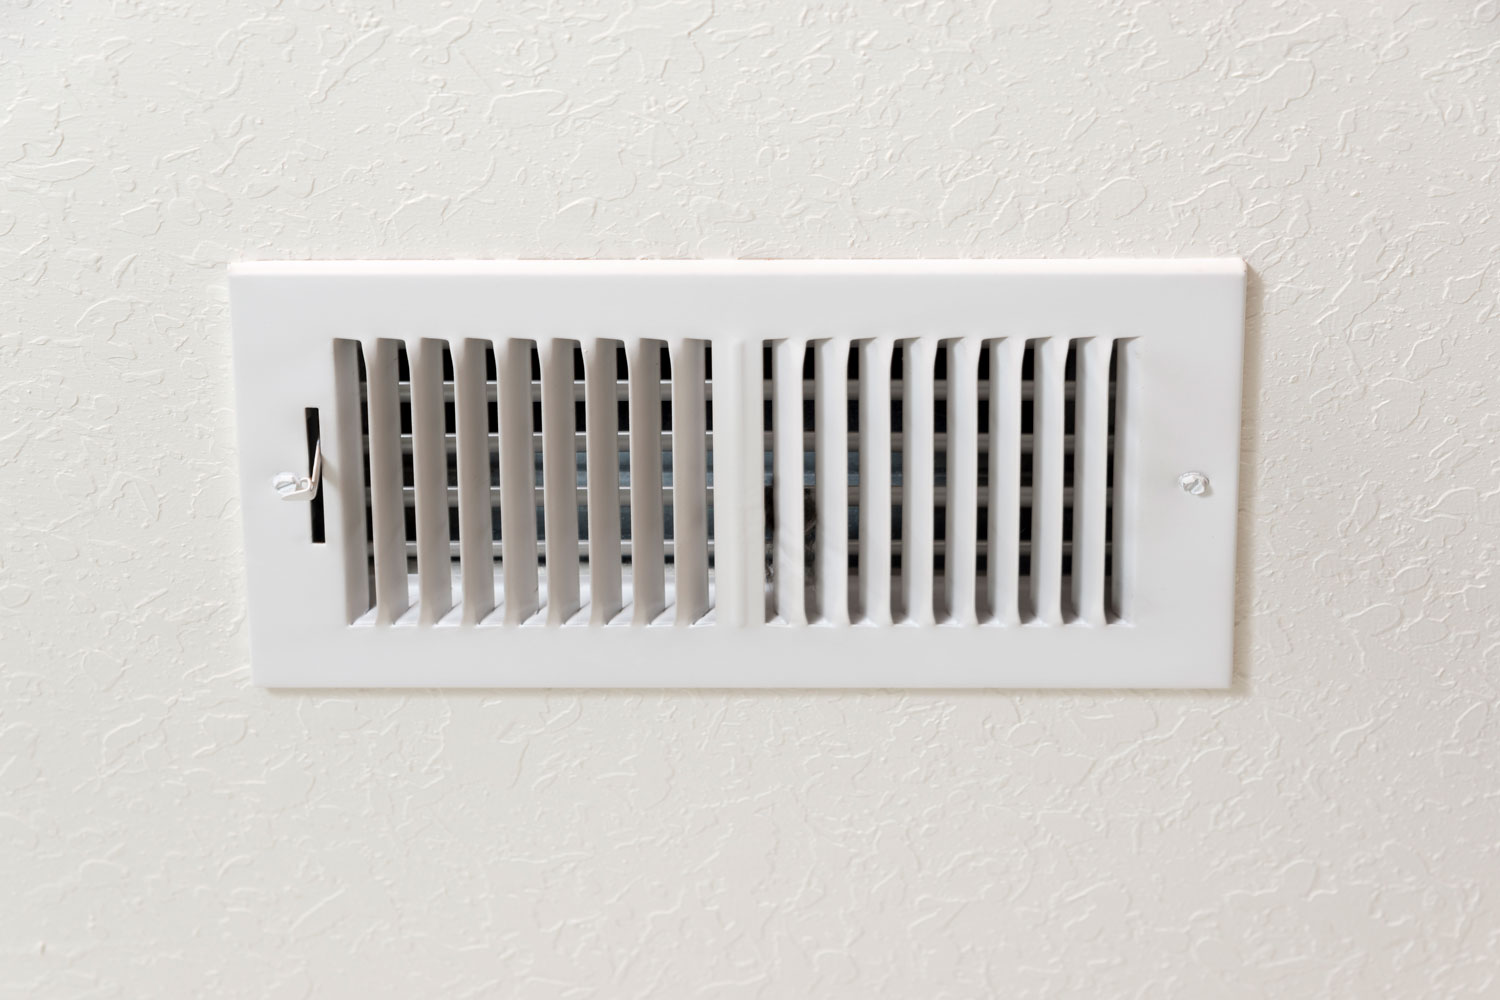 Air conditioning vent inside a small room